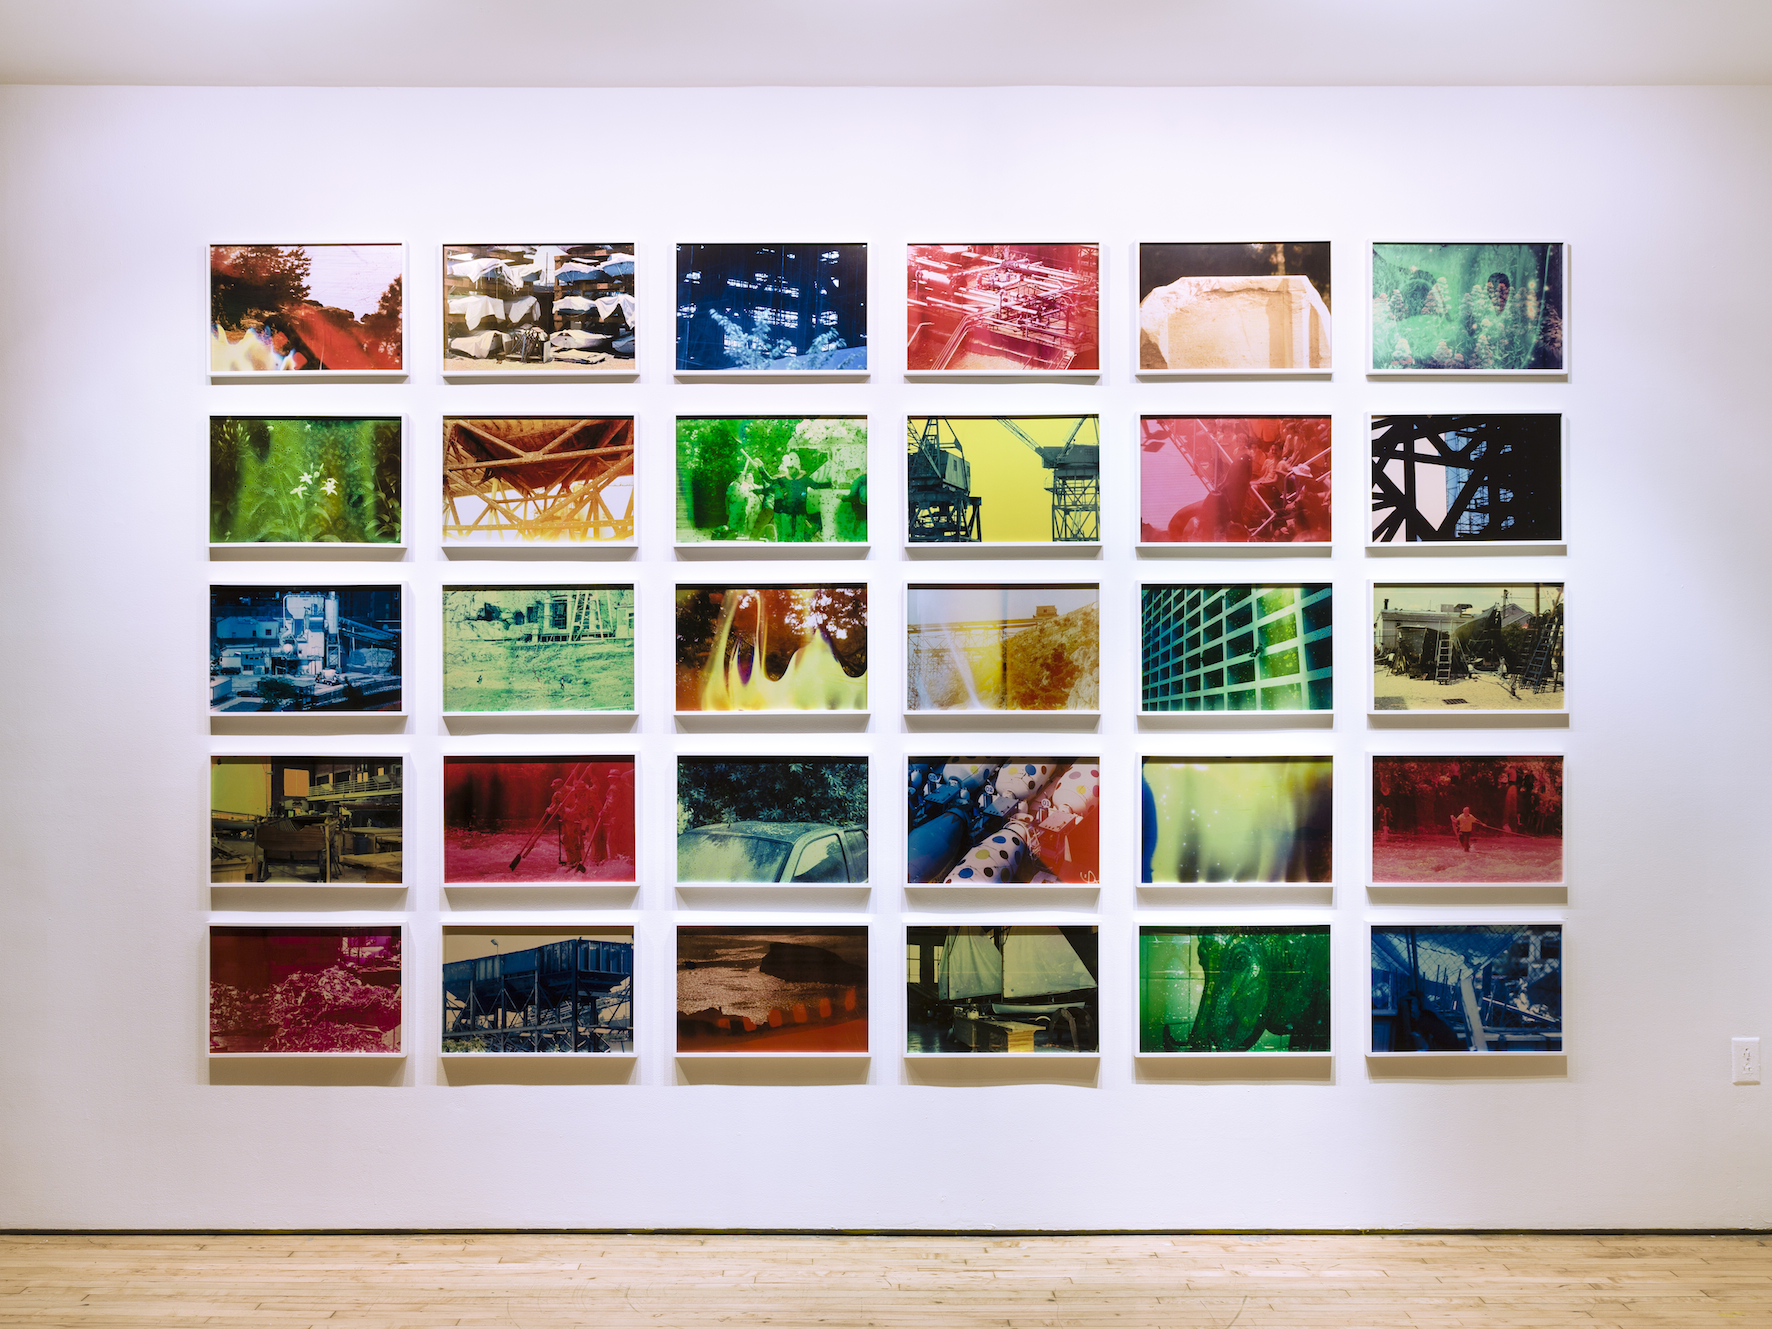  The Hollow Desire to Populate Imaginary Cities, 2014, 30 C- Prints from chemically altered slides on metallic paper, 34 x 50 cm each, Edition 3 + 1AP Installation shot of Exhibition at Art in General , NYC, 2014- 2015. 